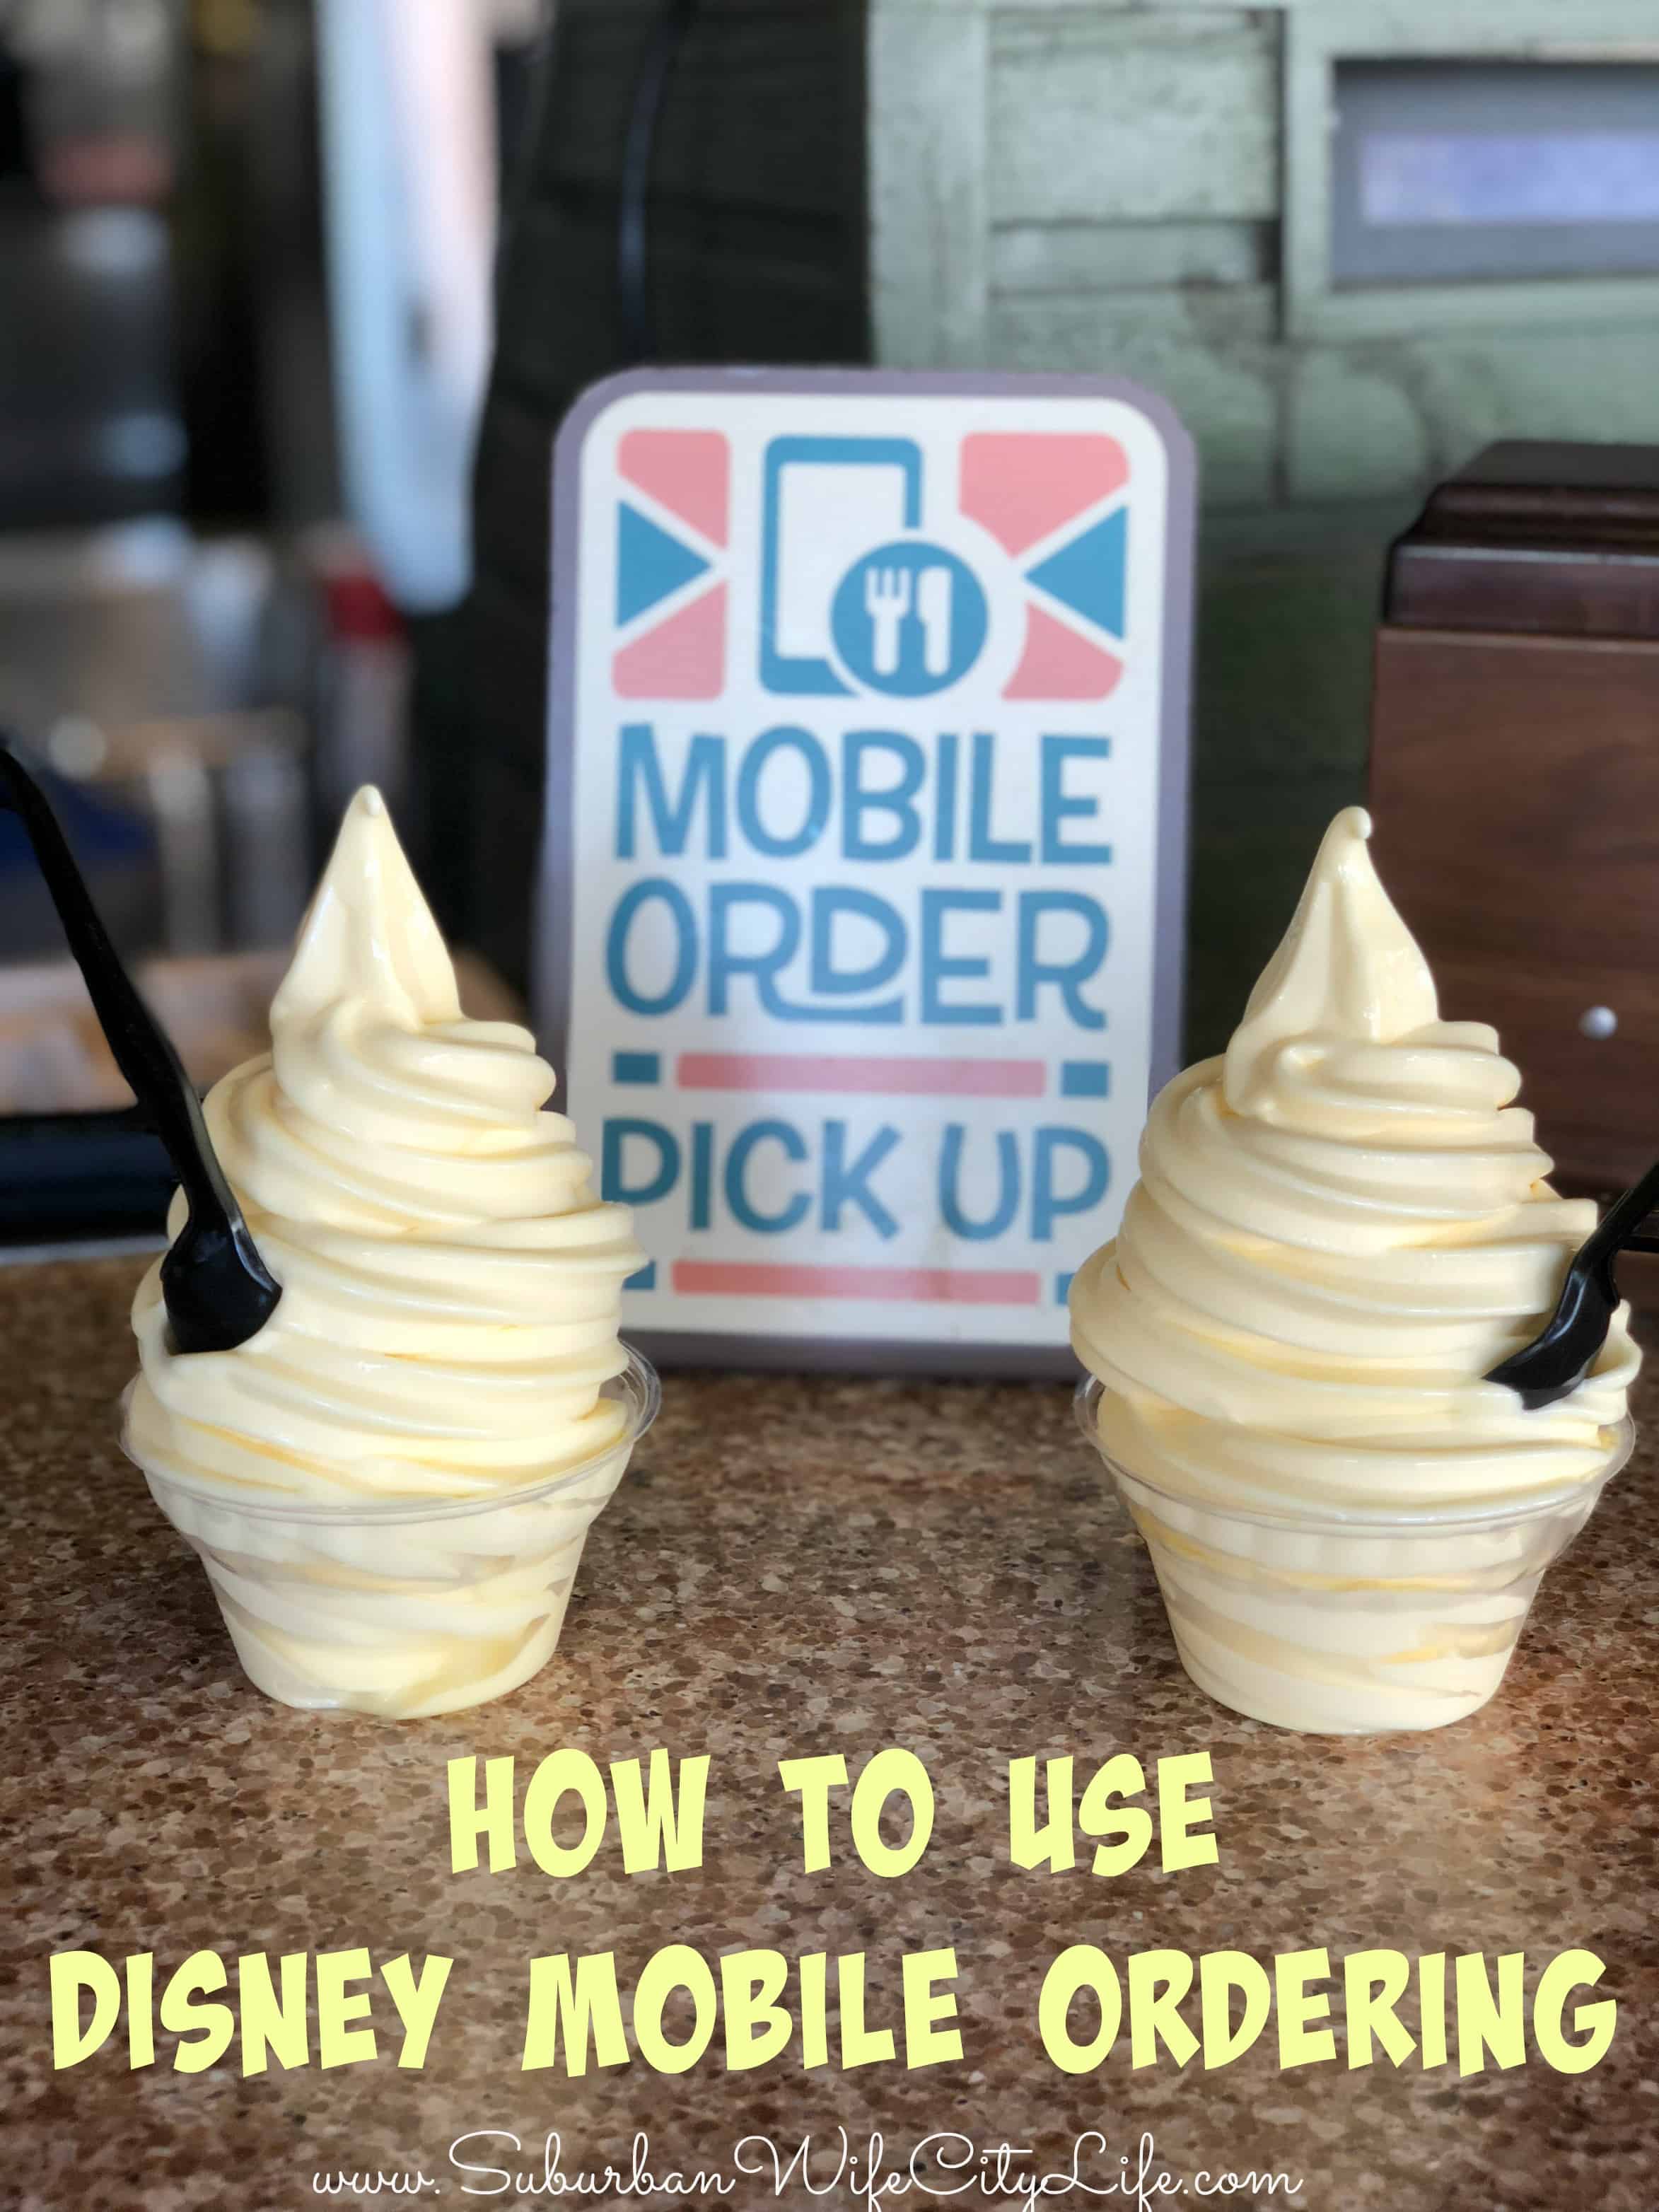 How to use Disney Mobile Ordering